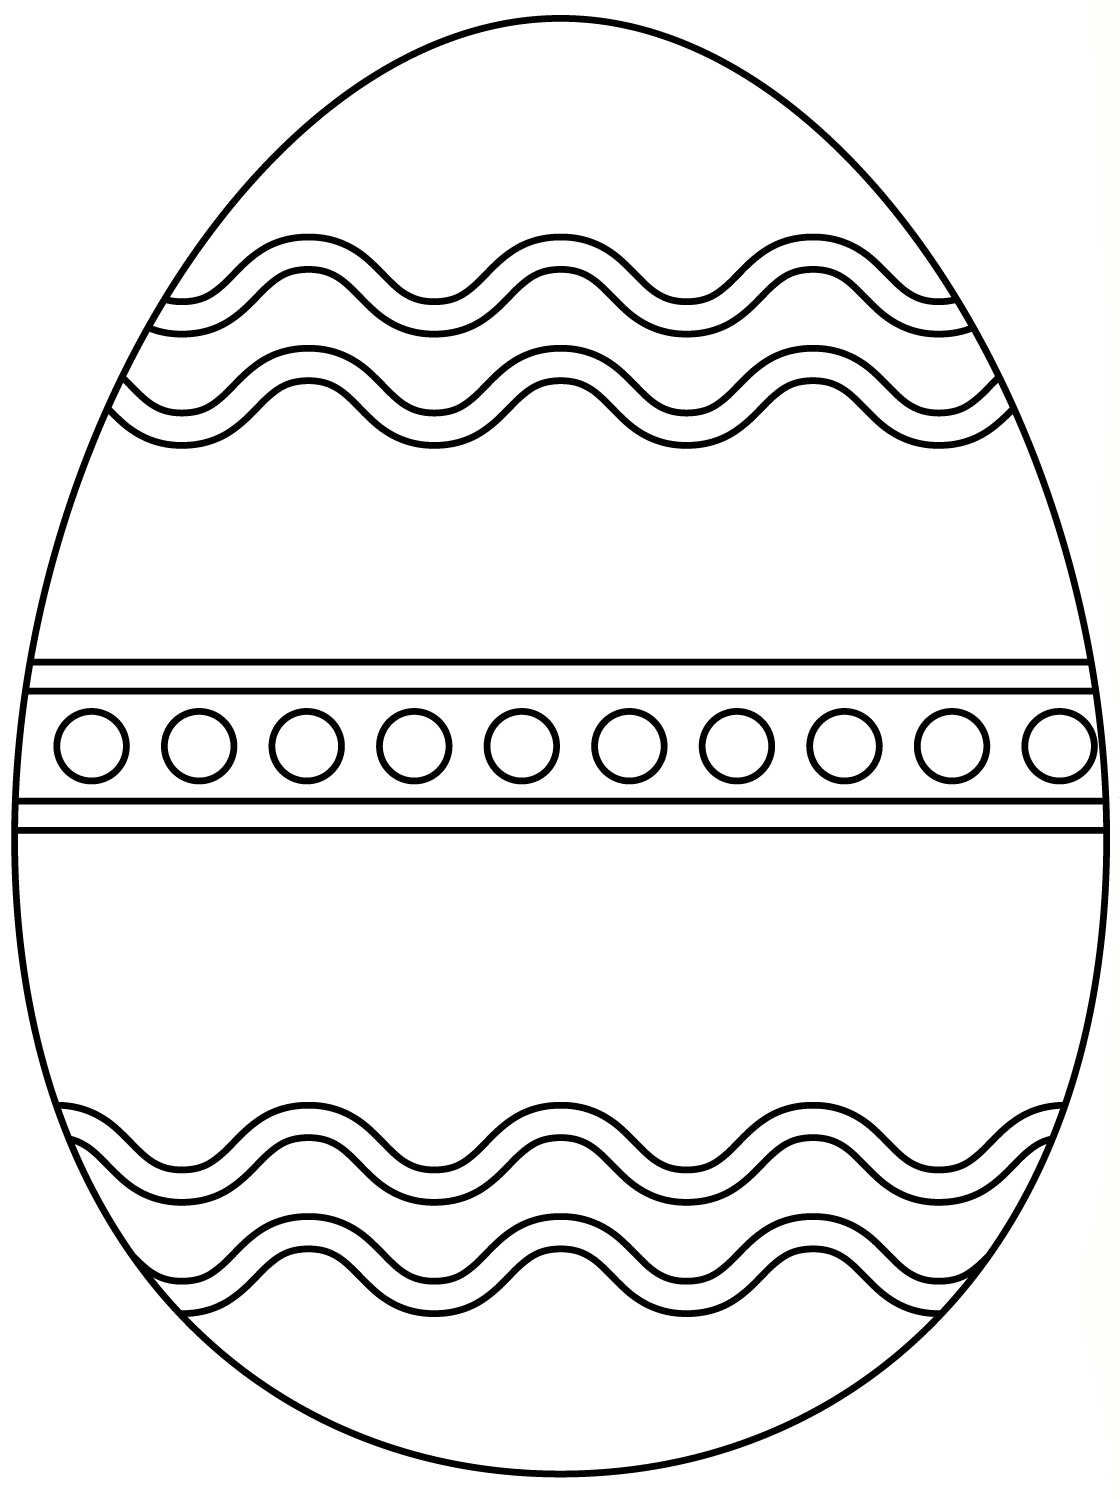 Download Pattern of Easter Egg Coloring Page - Free Coloring Pages Online